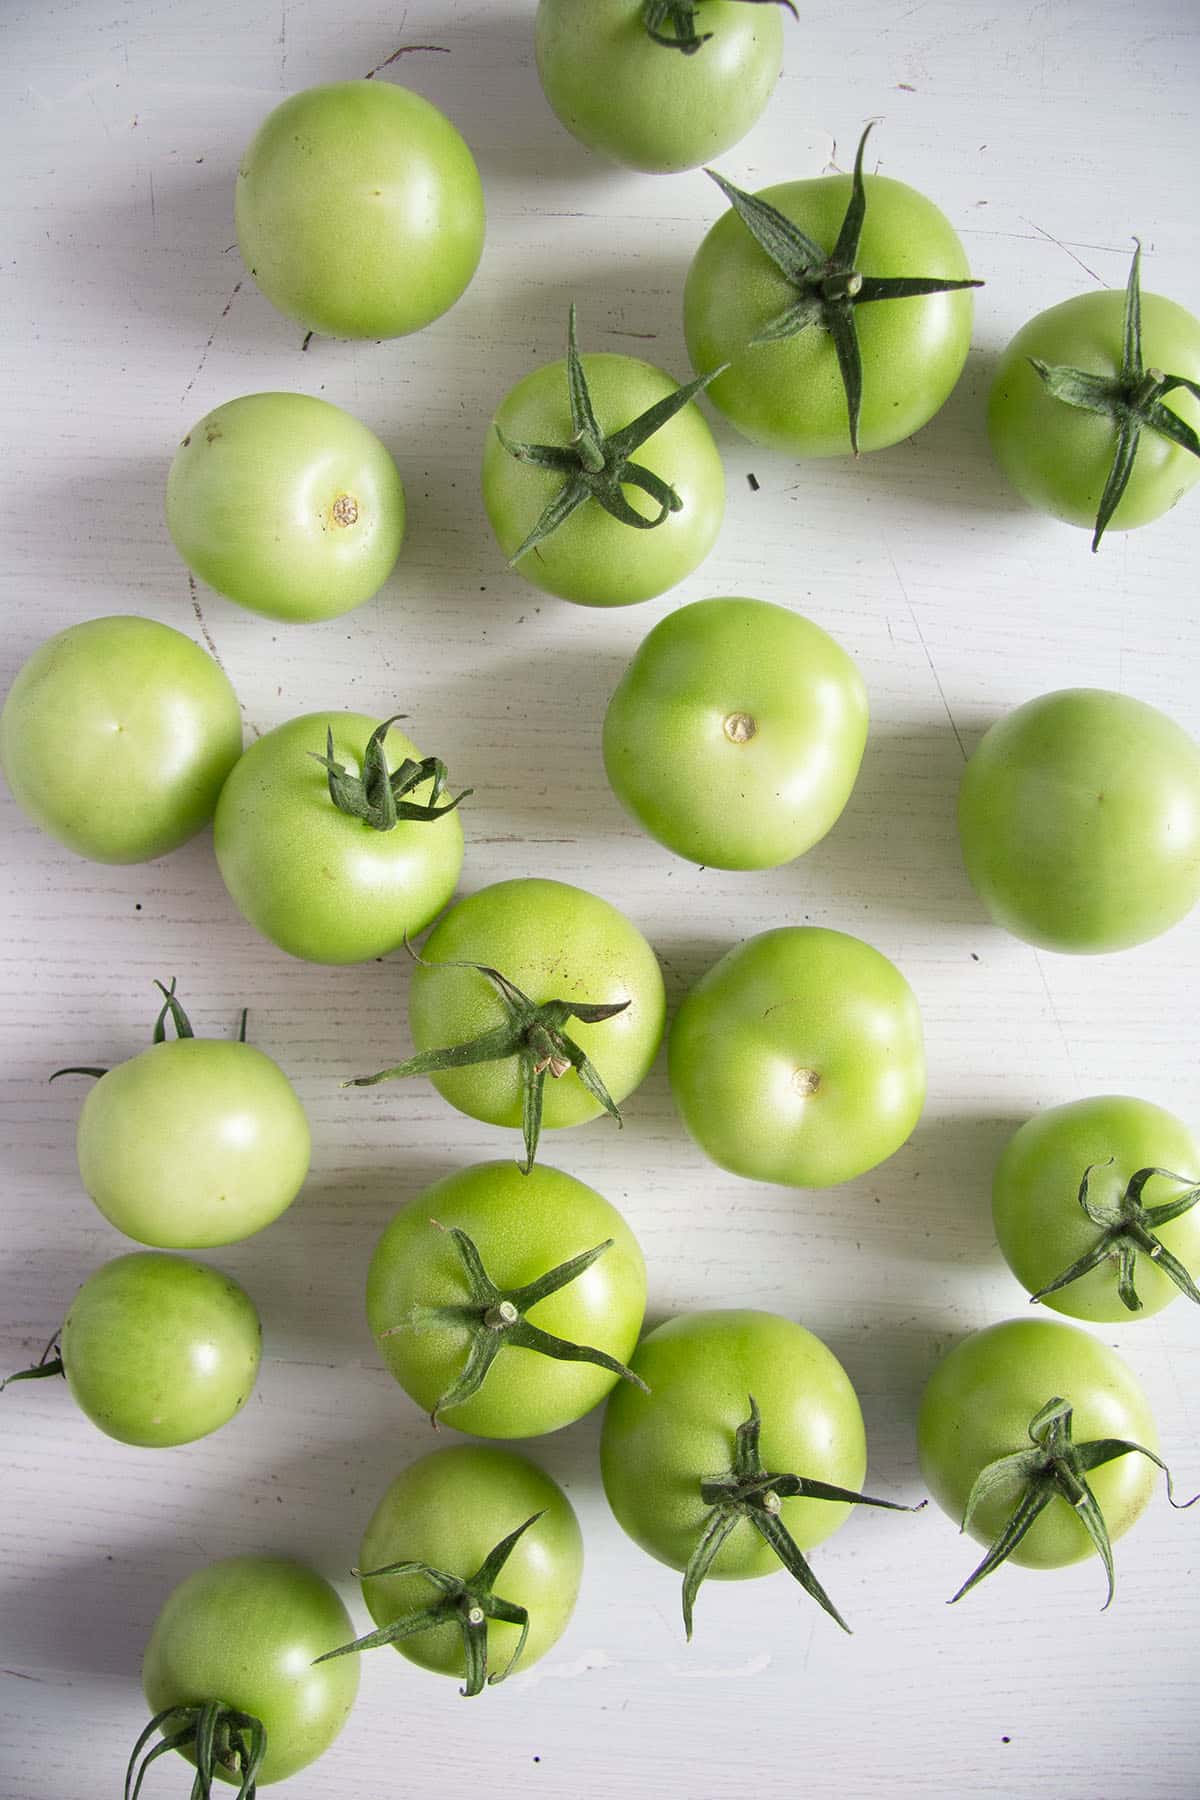 small green tomatoes on the table.